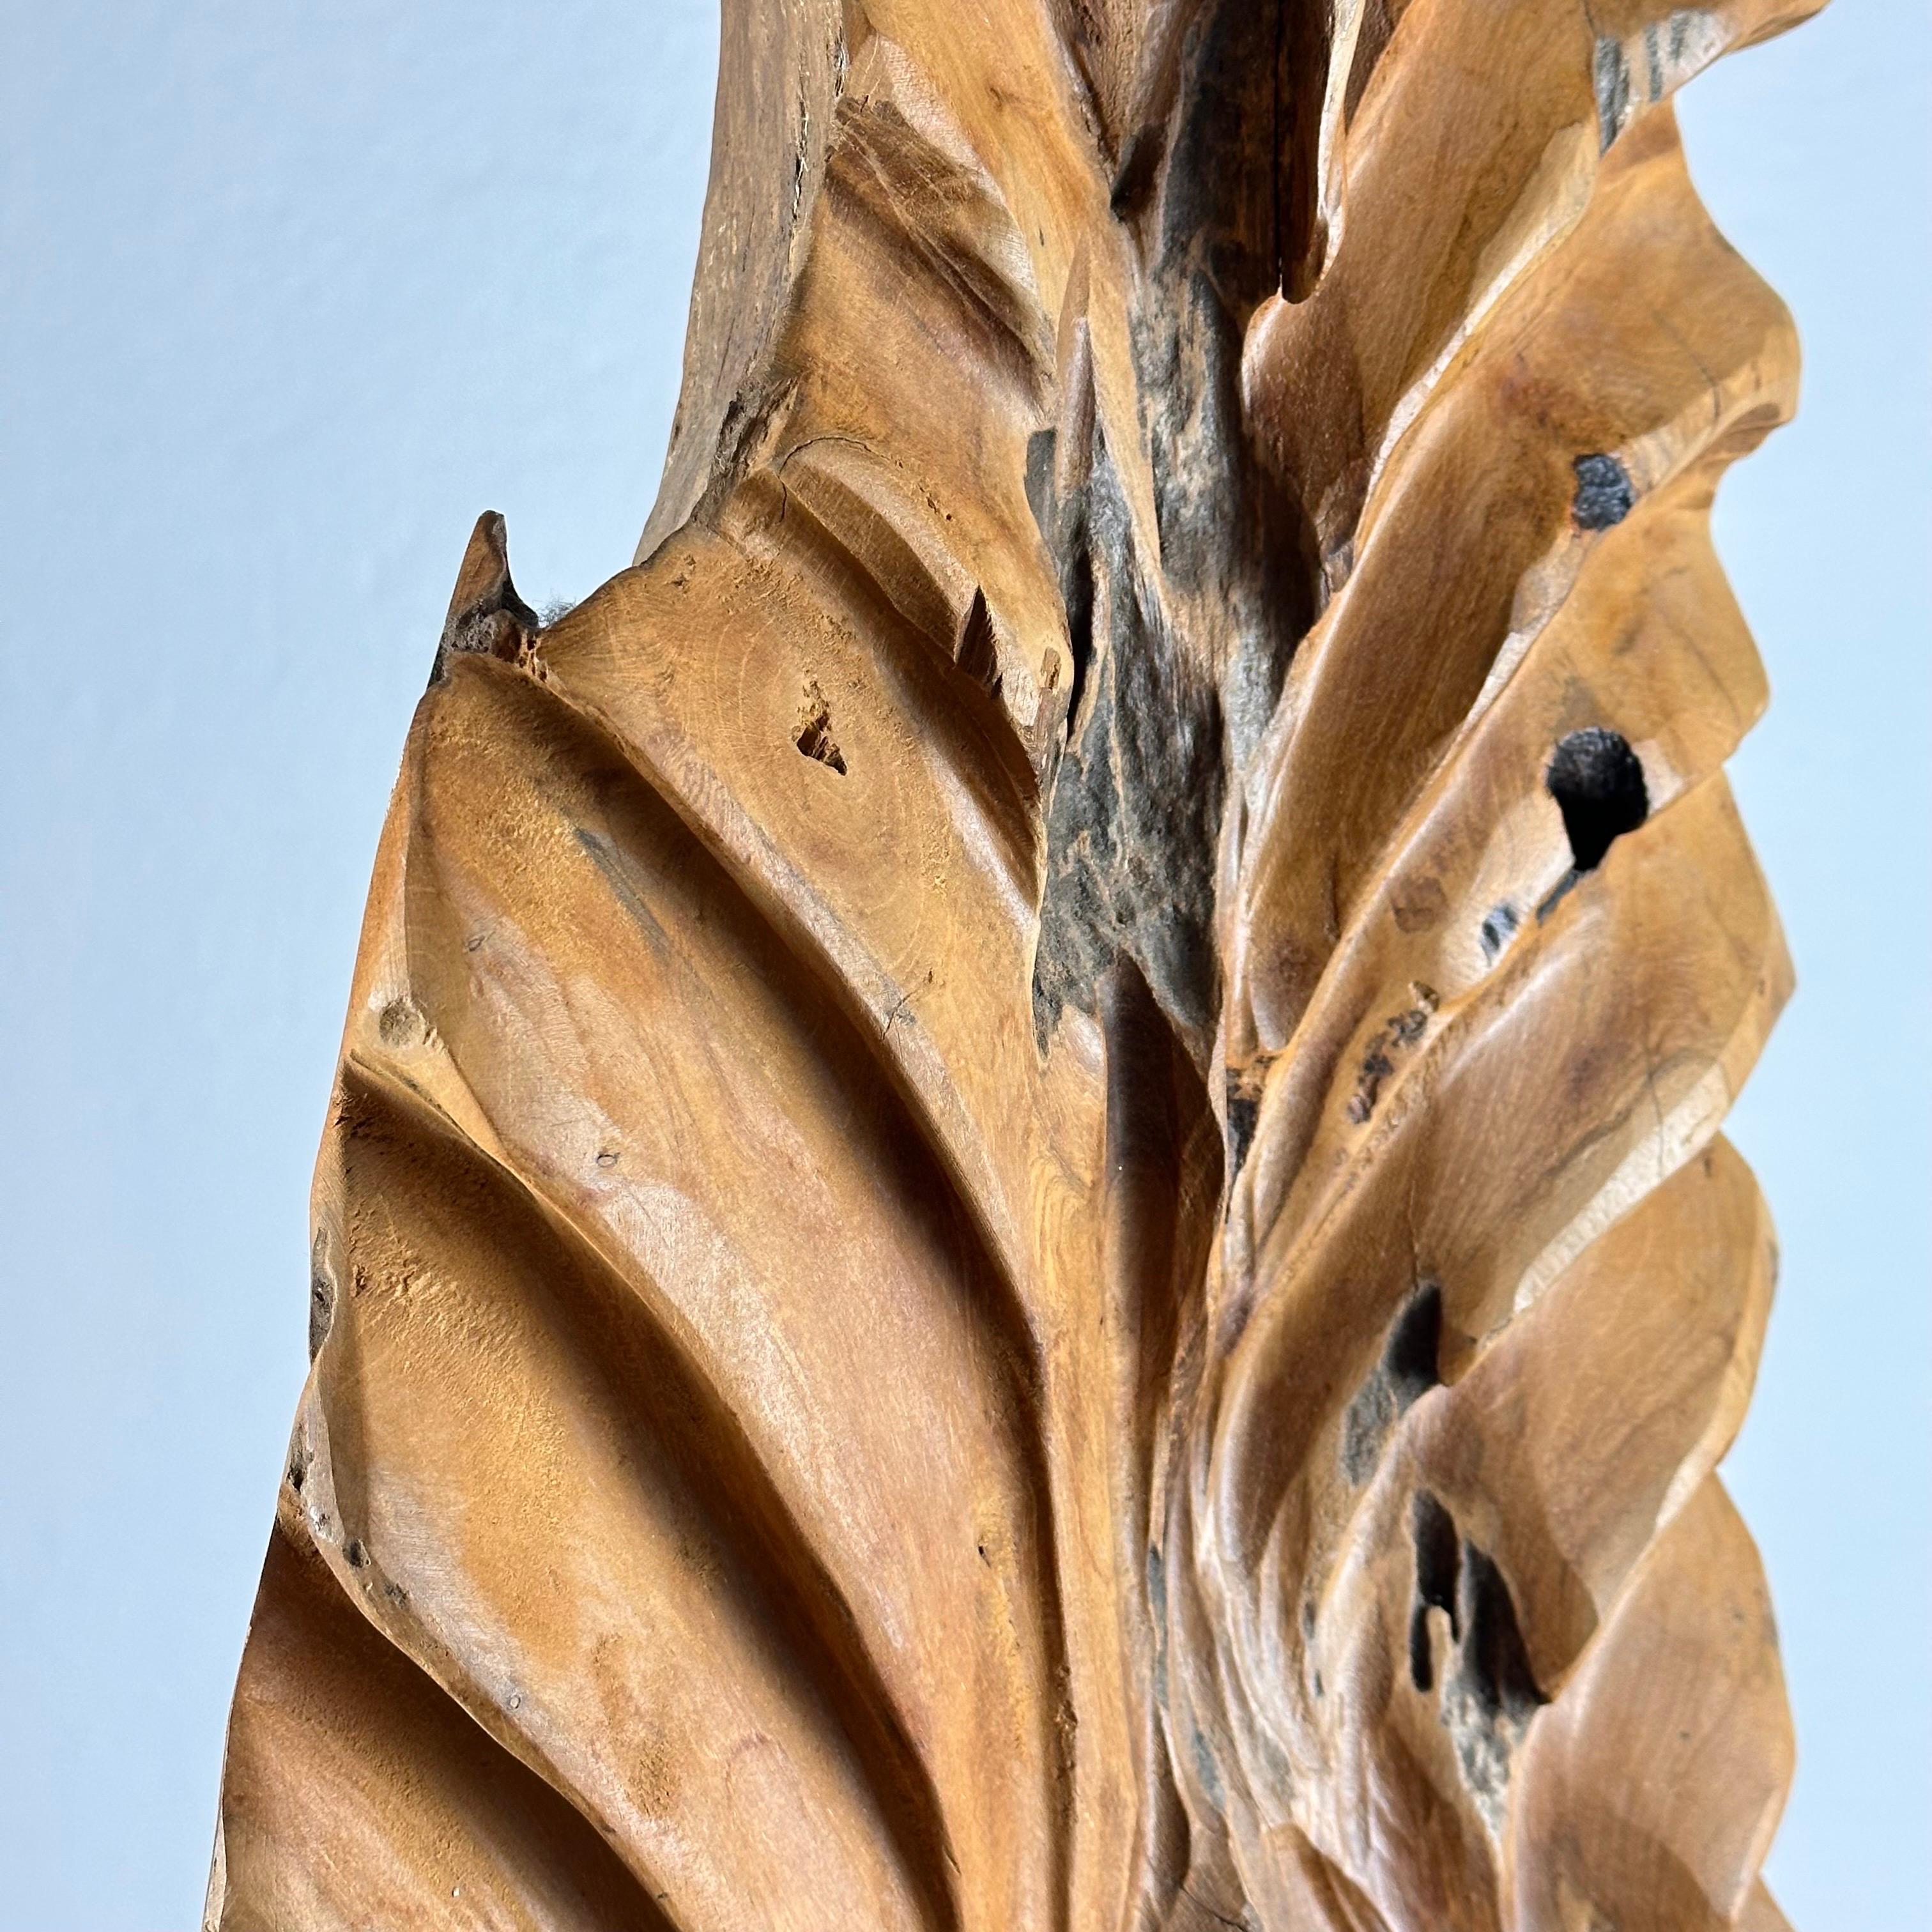 Exquisite Italian Phytomorphic Abstract Sculpture in Natural Ash, 1960s For Sale 4